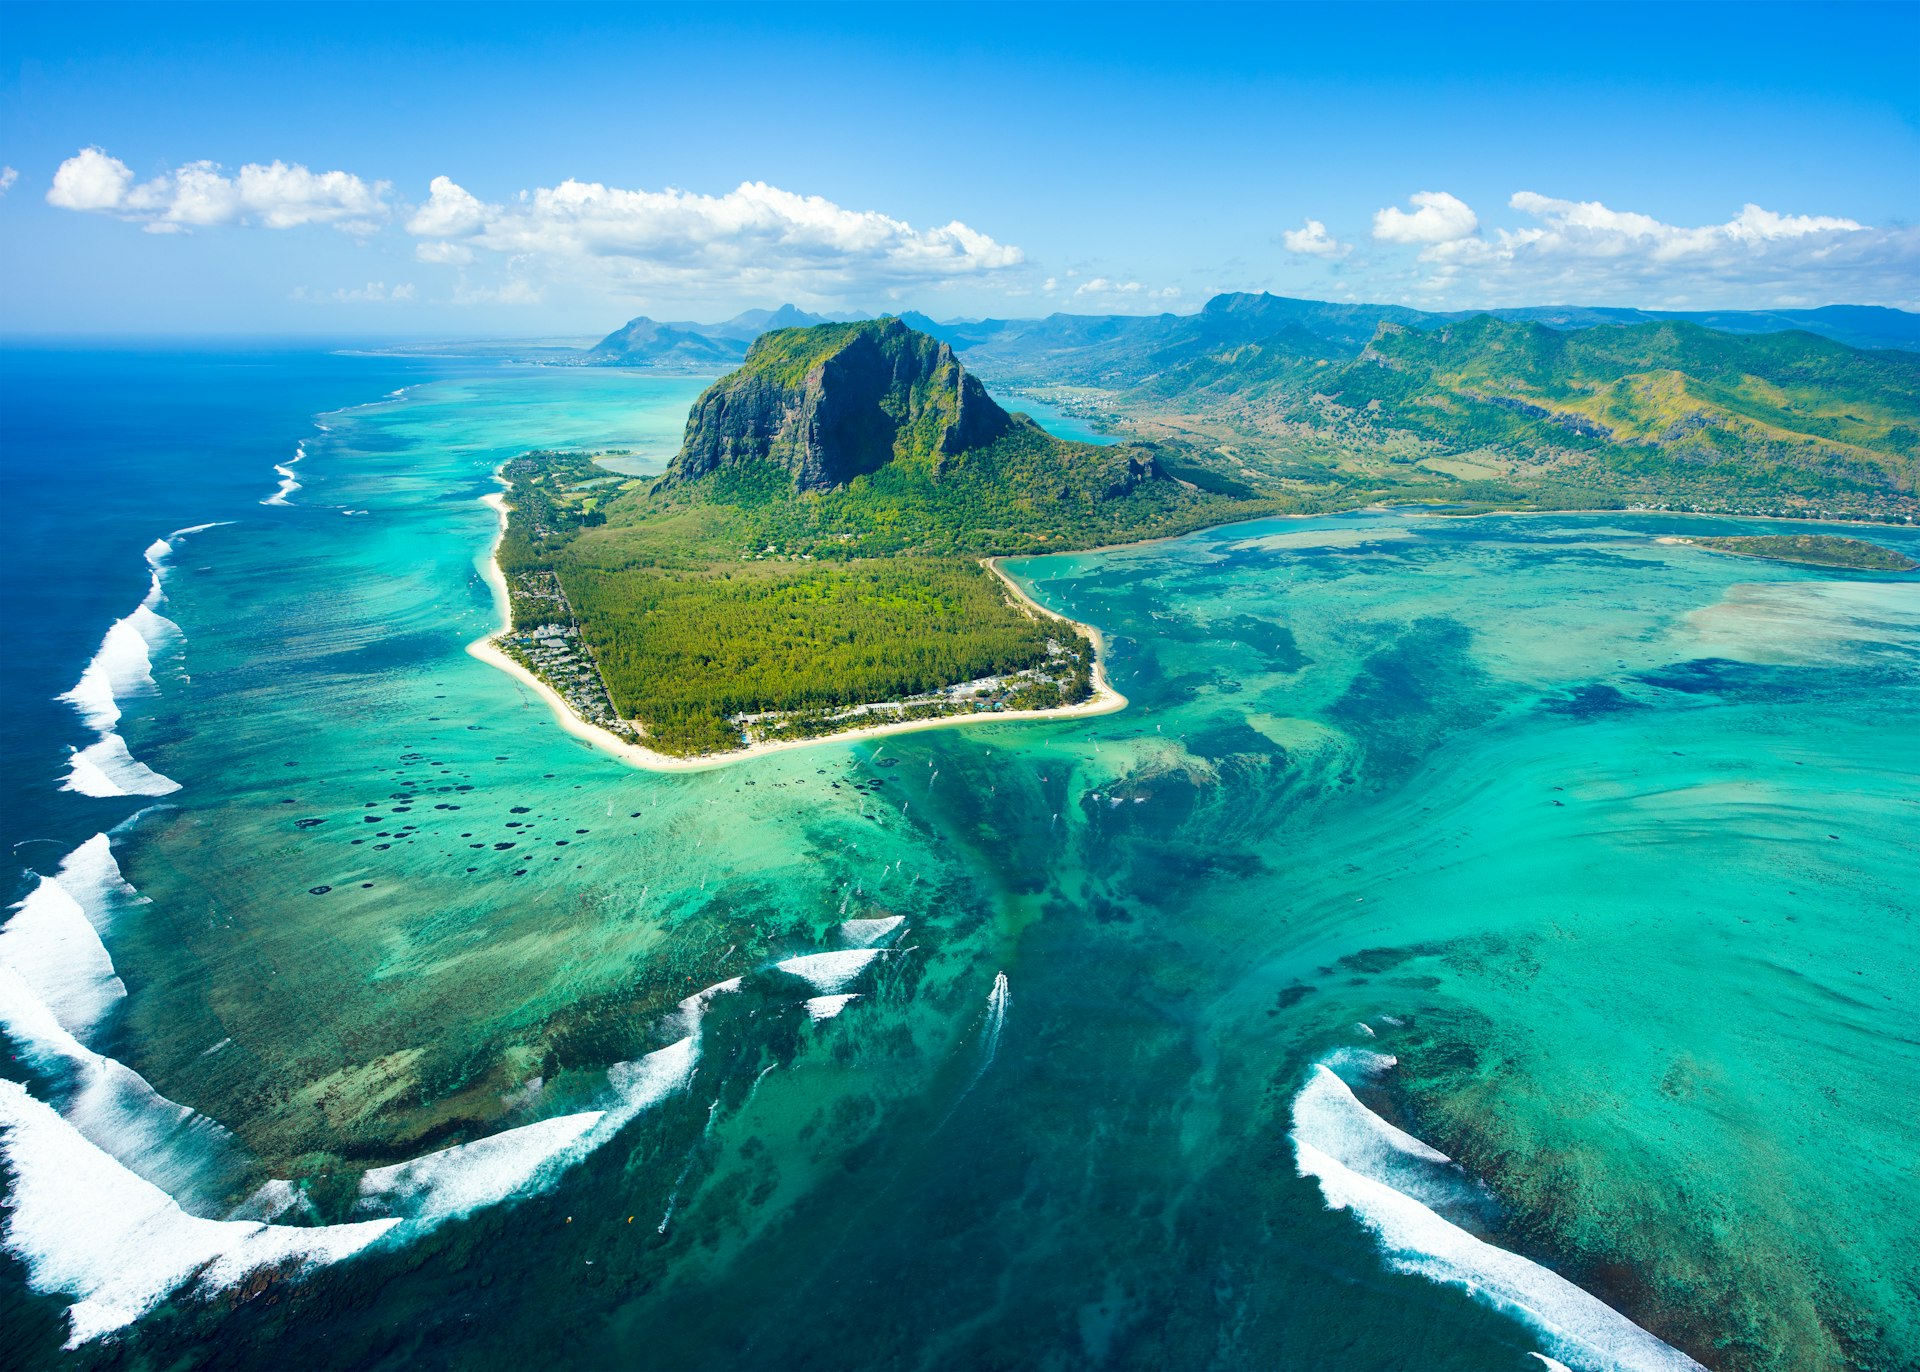 An aerial view shows a beautiful blue coastline and lush green mountain. 